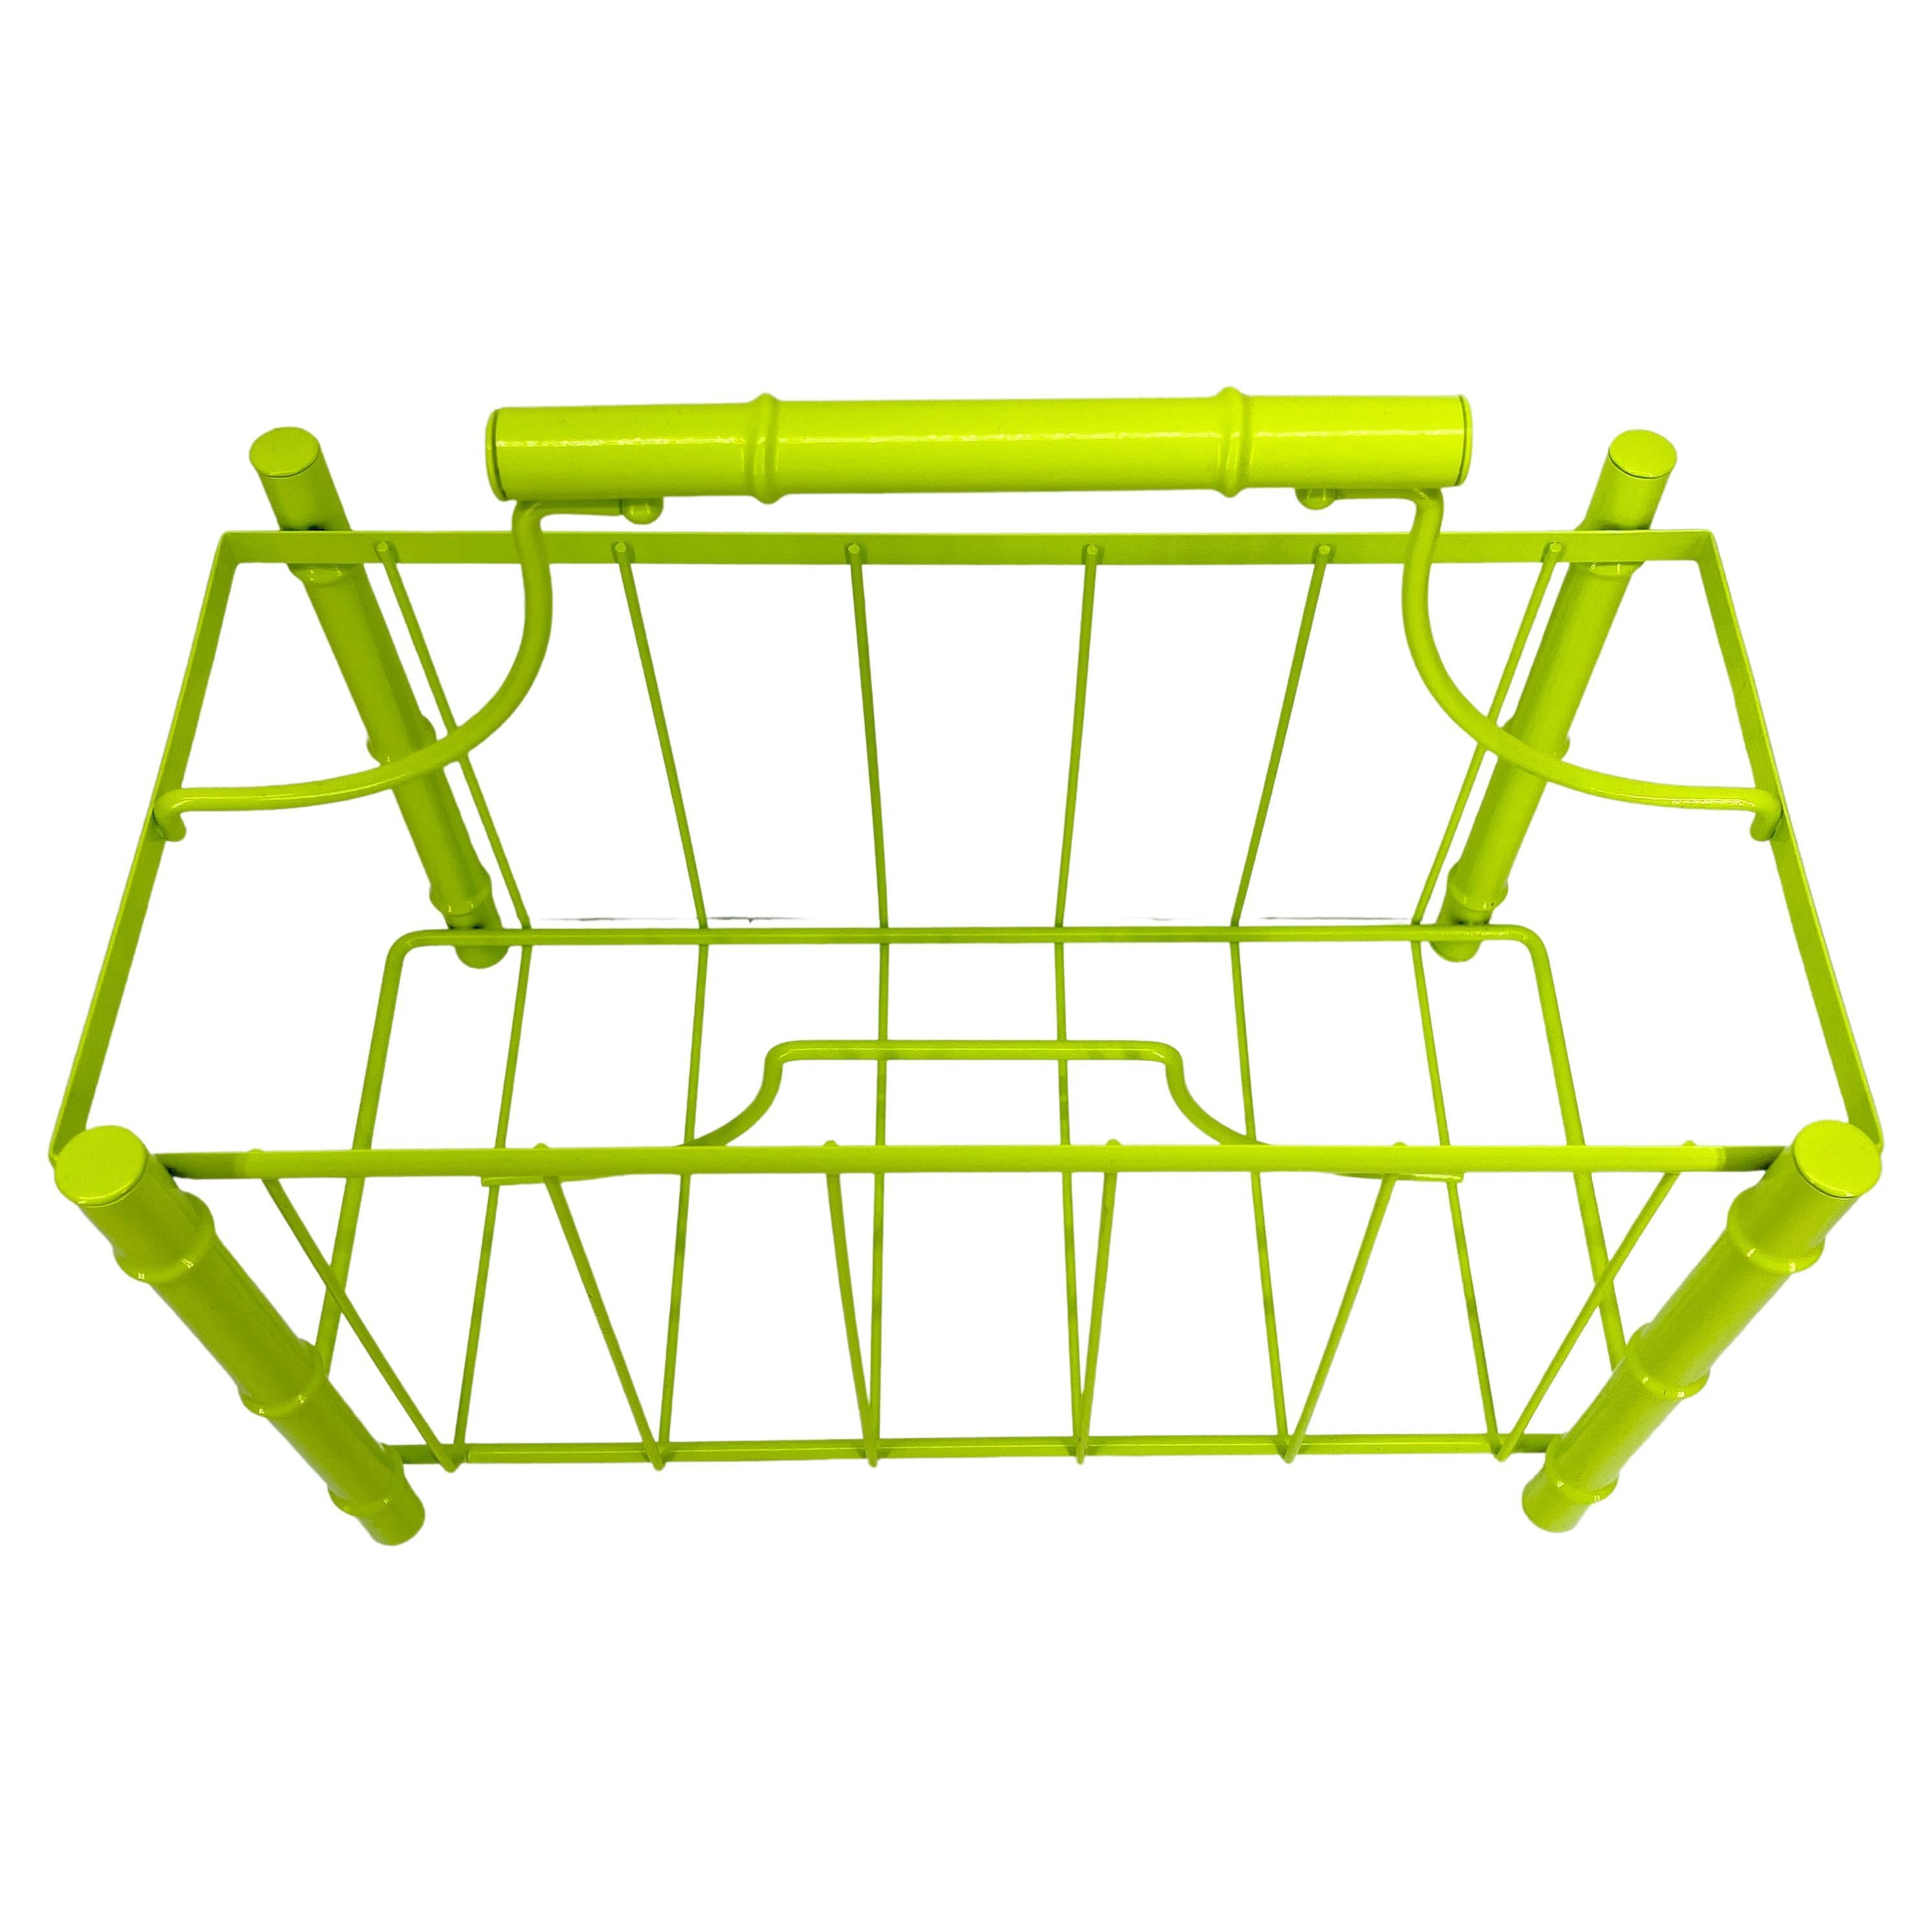 Mid-Century Modern Faux Bamboo Magazine Rack, Powder Coated Bright Chartreuse In Good Condition For Sale In Haddonfield, NJ